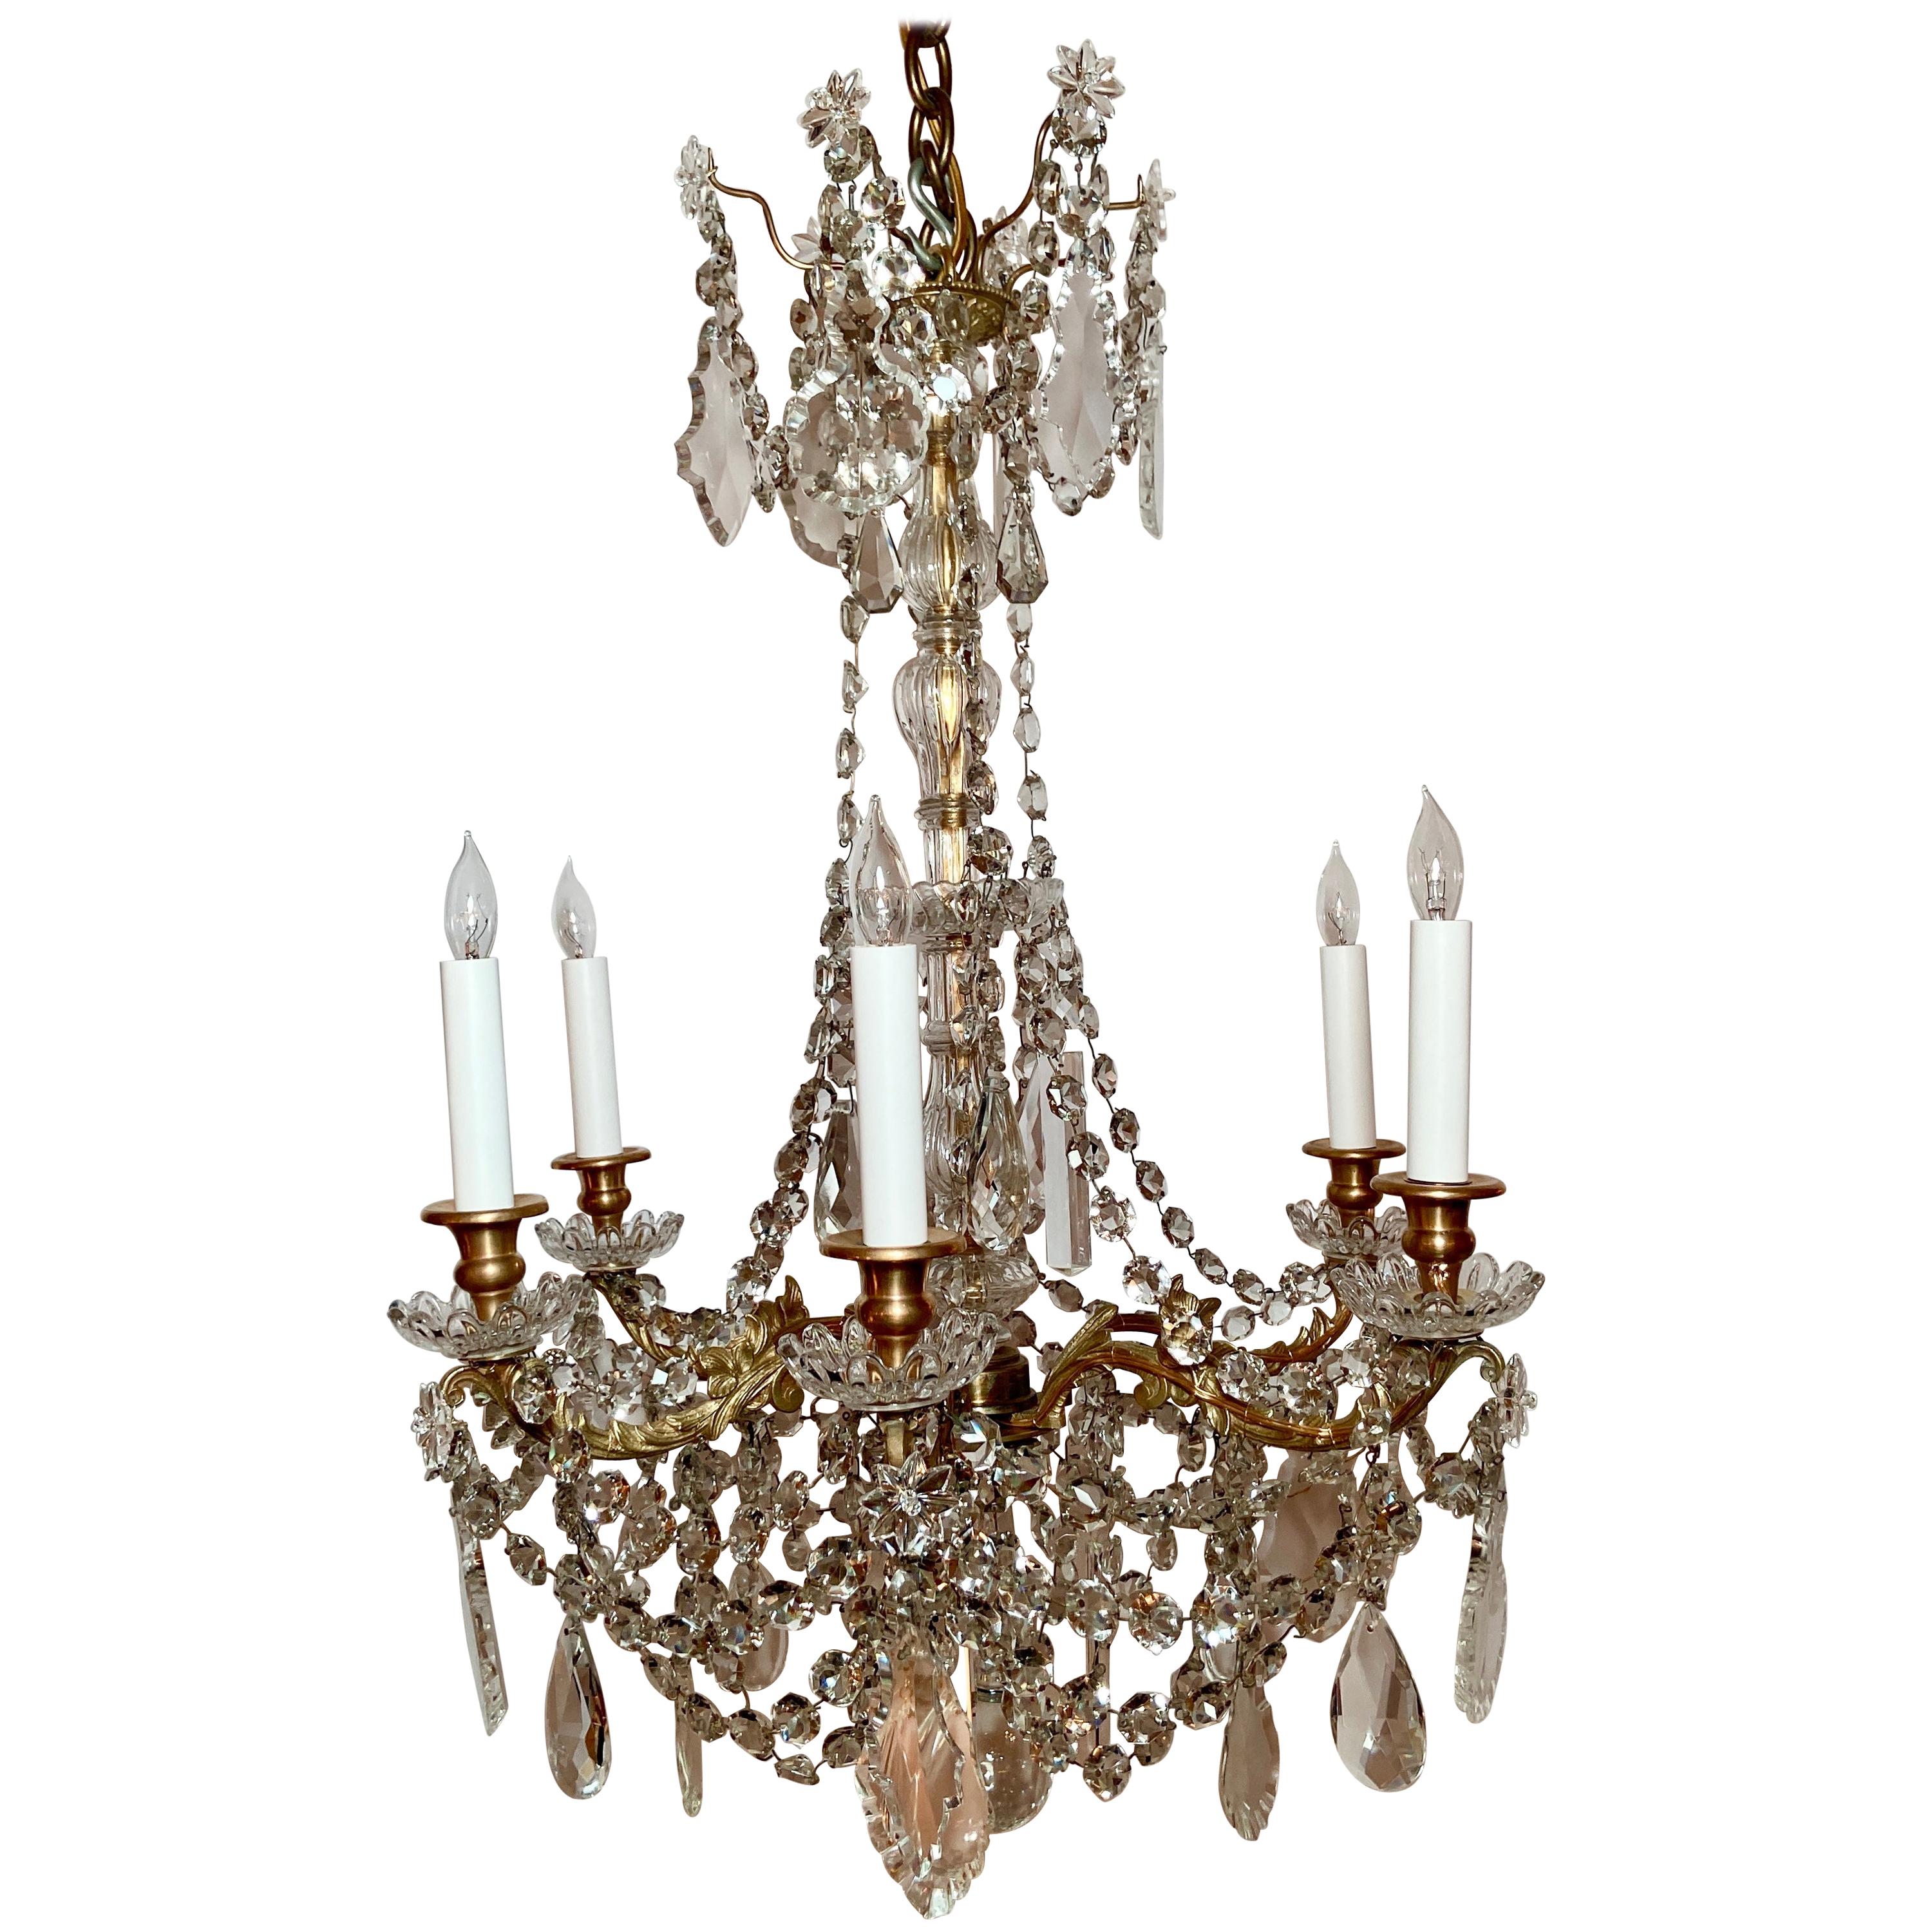 Antique French Gold Bronze and Baccarat Crystal Six Light Chandelier, Circa 1890